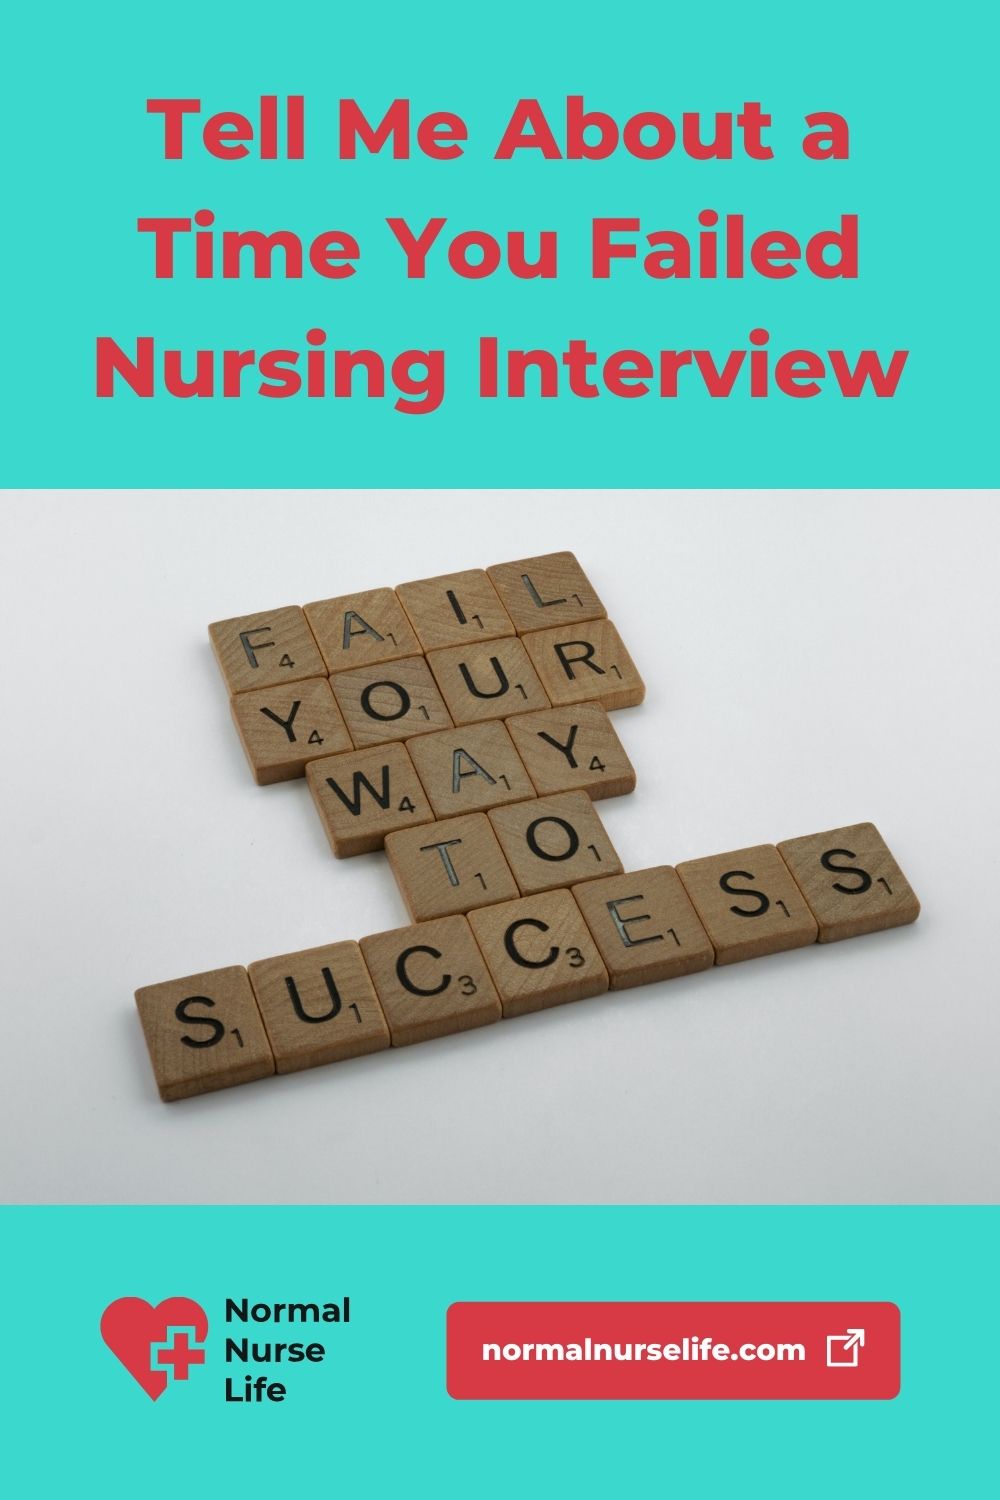 Nursing interview tell me about a mistake